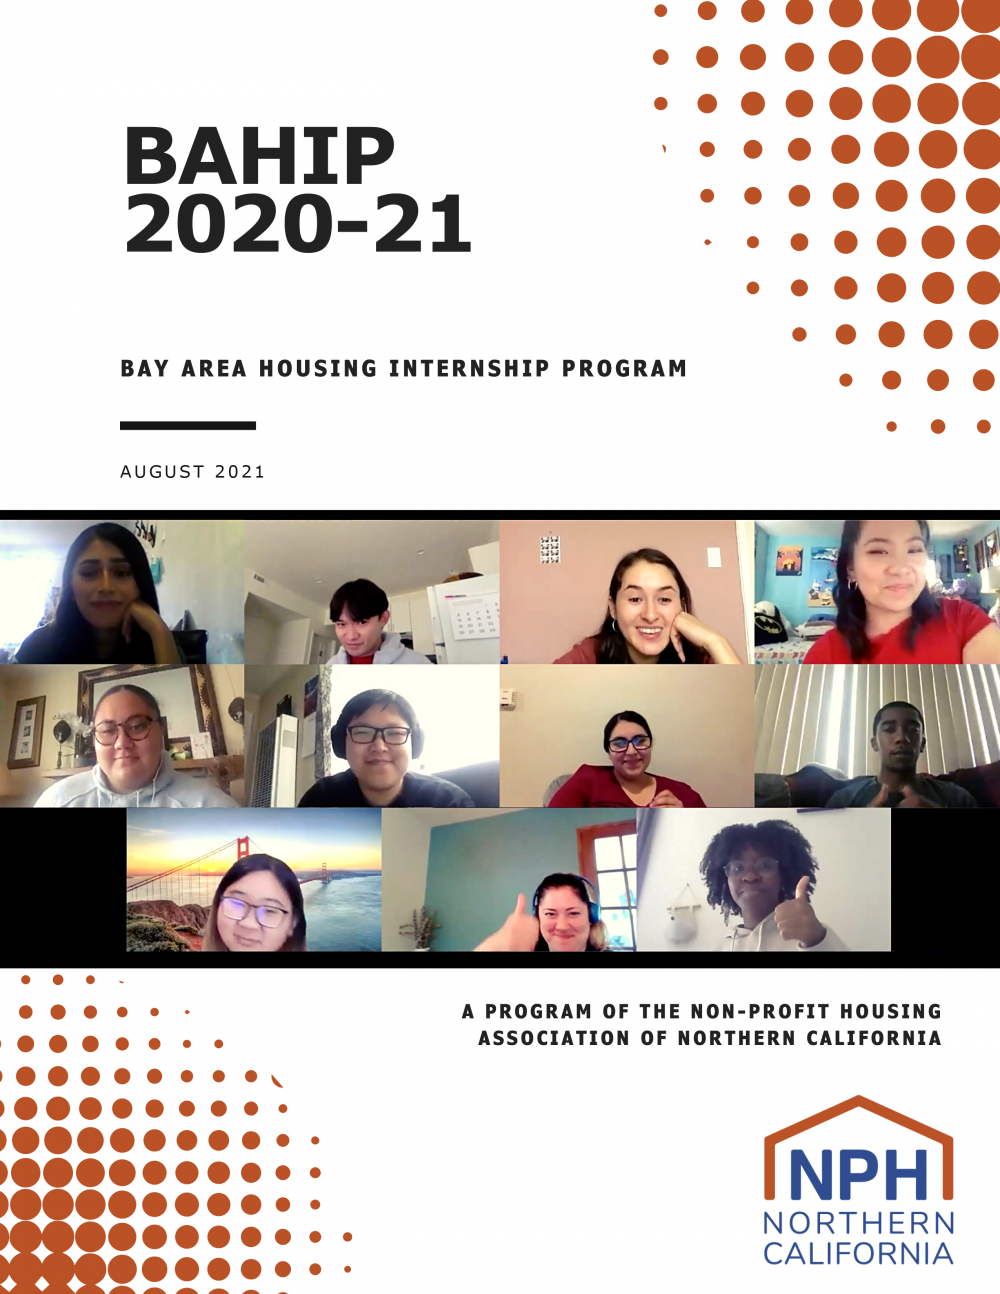 Cover photo of BAHIP report featuring interns.